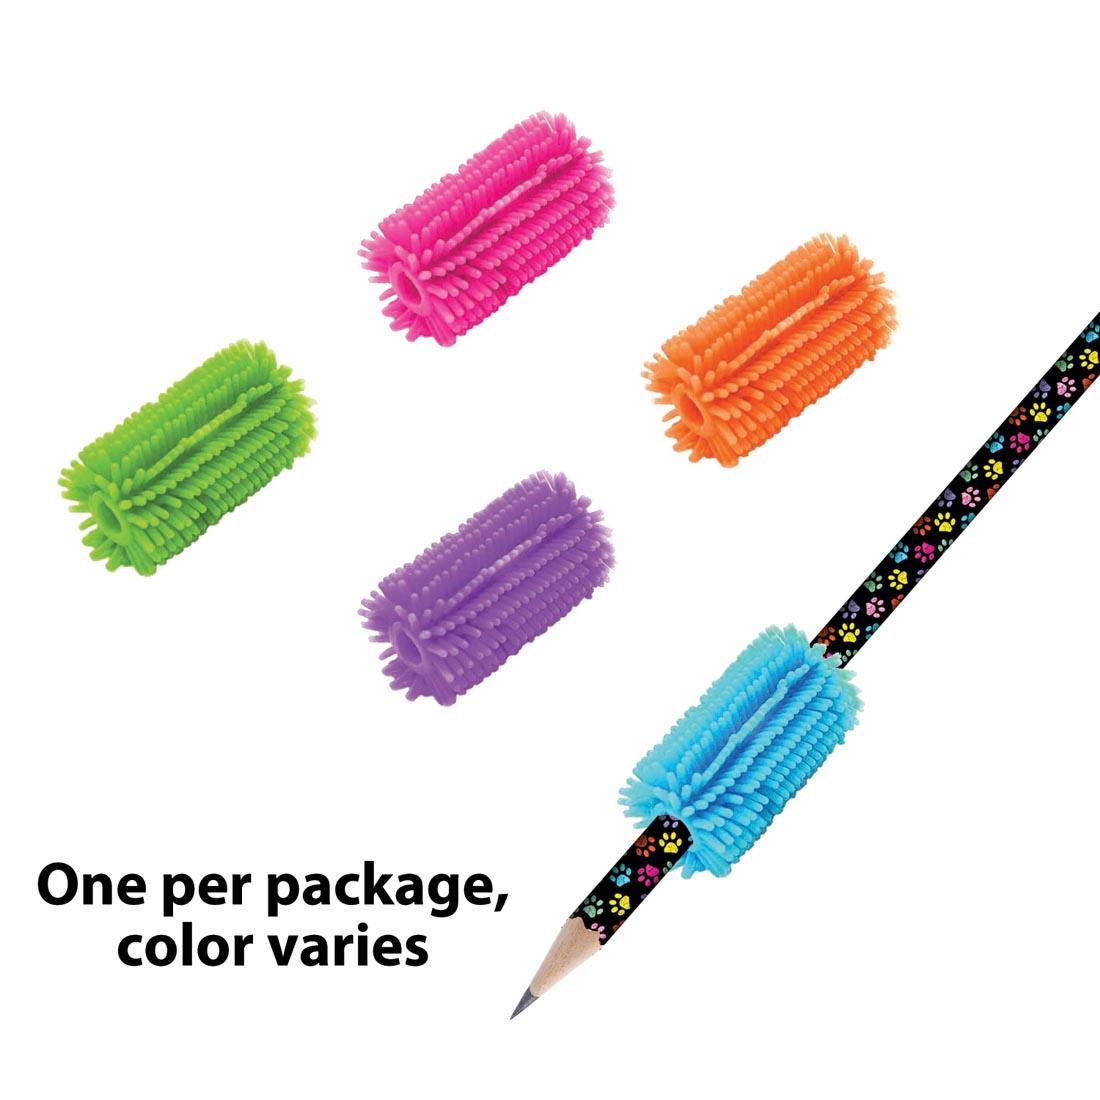 Four Griptastic Pencil Gripz plus one on a pencil and the text One per package, color varies